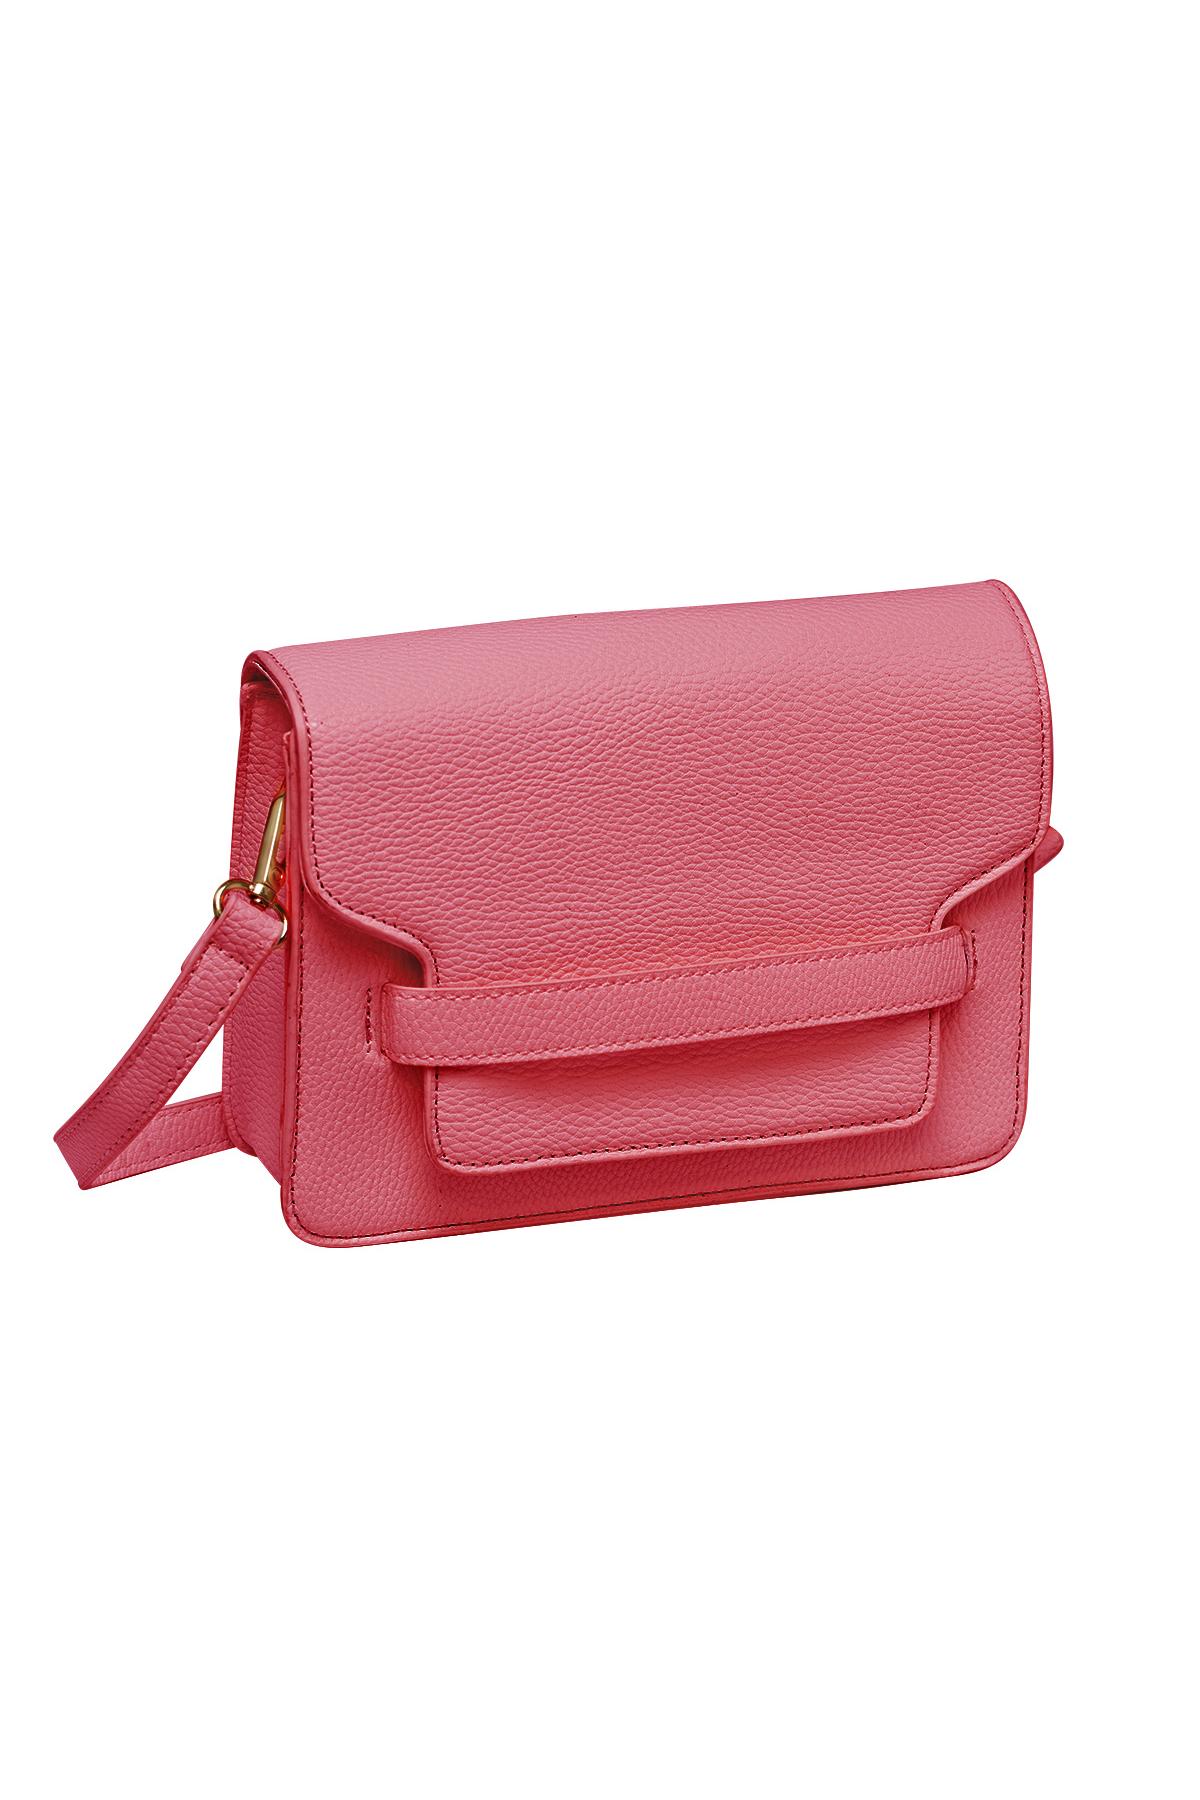 Square PU leather shoulder bag with buckle closure h5 